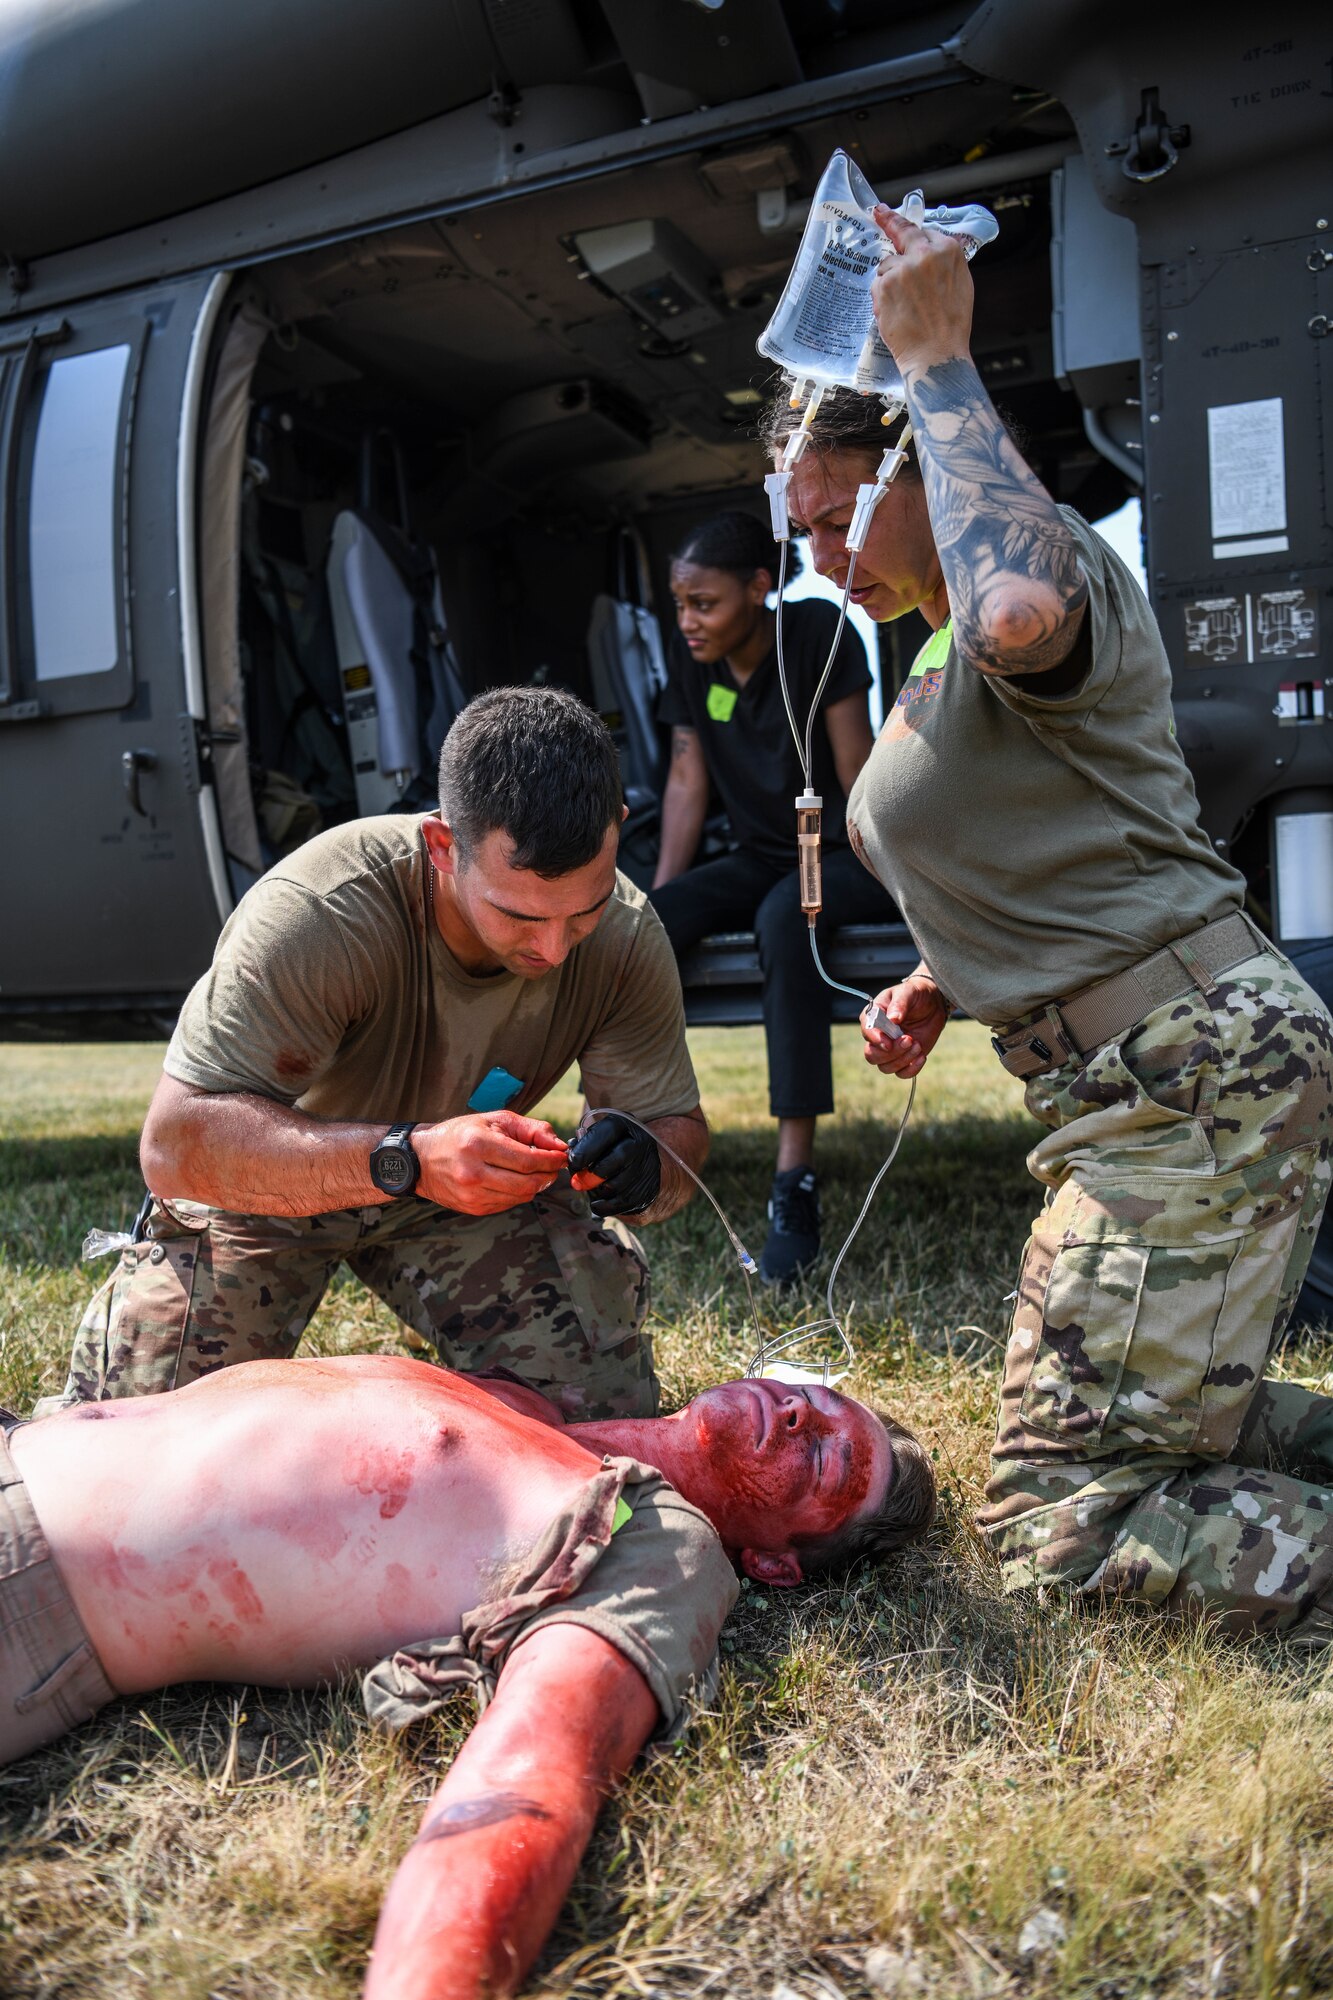 Approximately 120 members of the 445th Aeromedical Staging Squadron, 944th ASTS, Luke AFB, Arizona, and the 244th Aviation Combat Brigade, Fort Knox, Kentucky, undergo Tactical Combat Casualty Care training at Wright State University's Calamityville, Fairborn, Ohio, August 7, 2021. Calamityville is a training, testing, and research venue where military and civilian emergency first responders hone their skills while building relationships. The training was designed to increase skills in caring for combat wounded in challenging remote locations where traditional medical evacuation may not be possible.